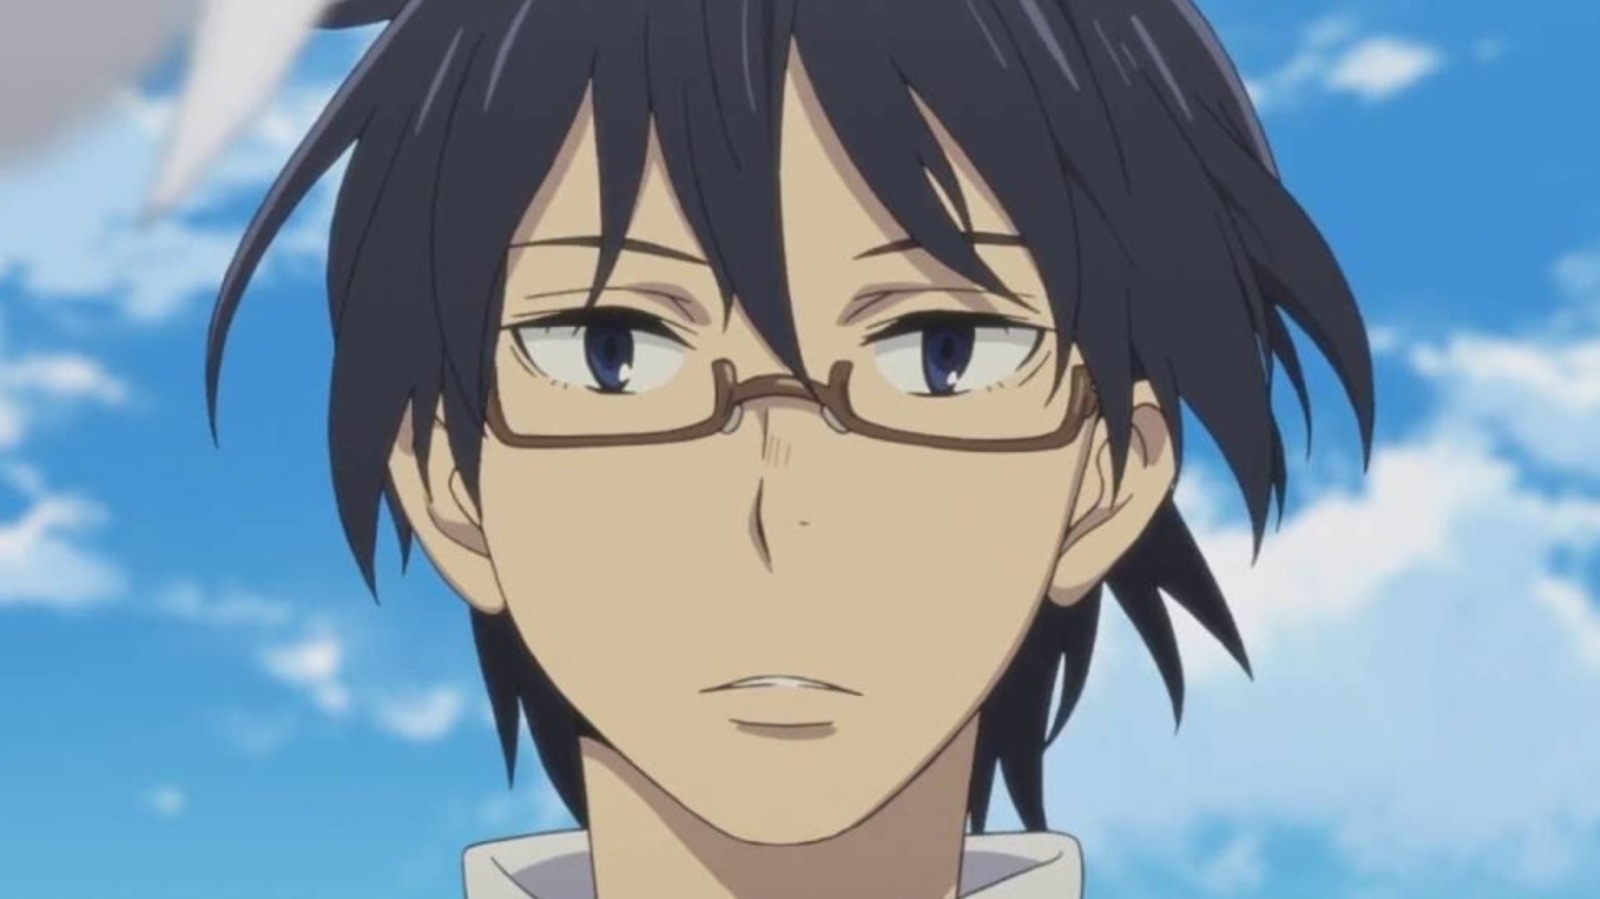 Erased Season 2 Release Date, Plot And Cast - What We Know ...